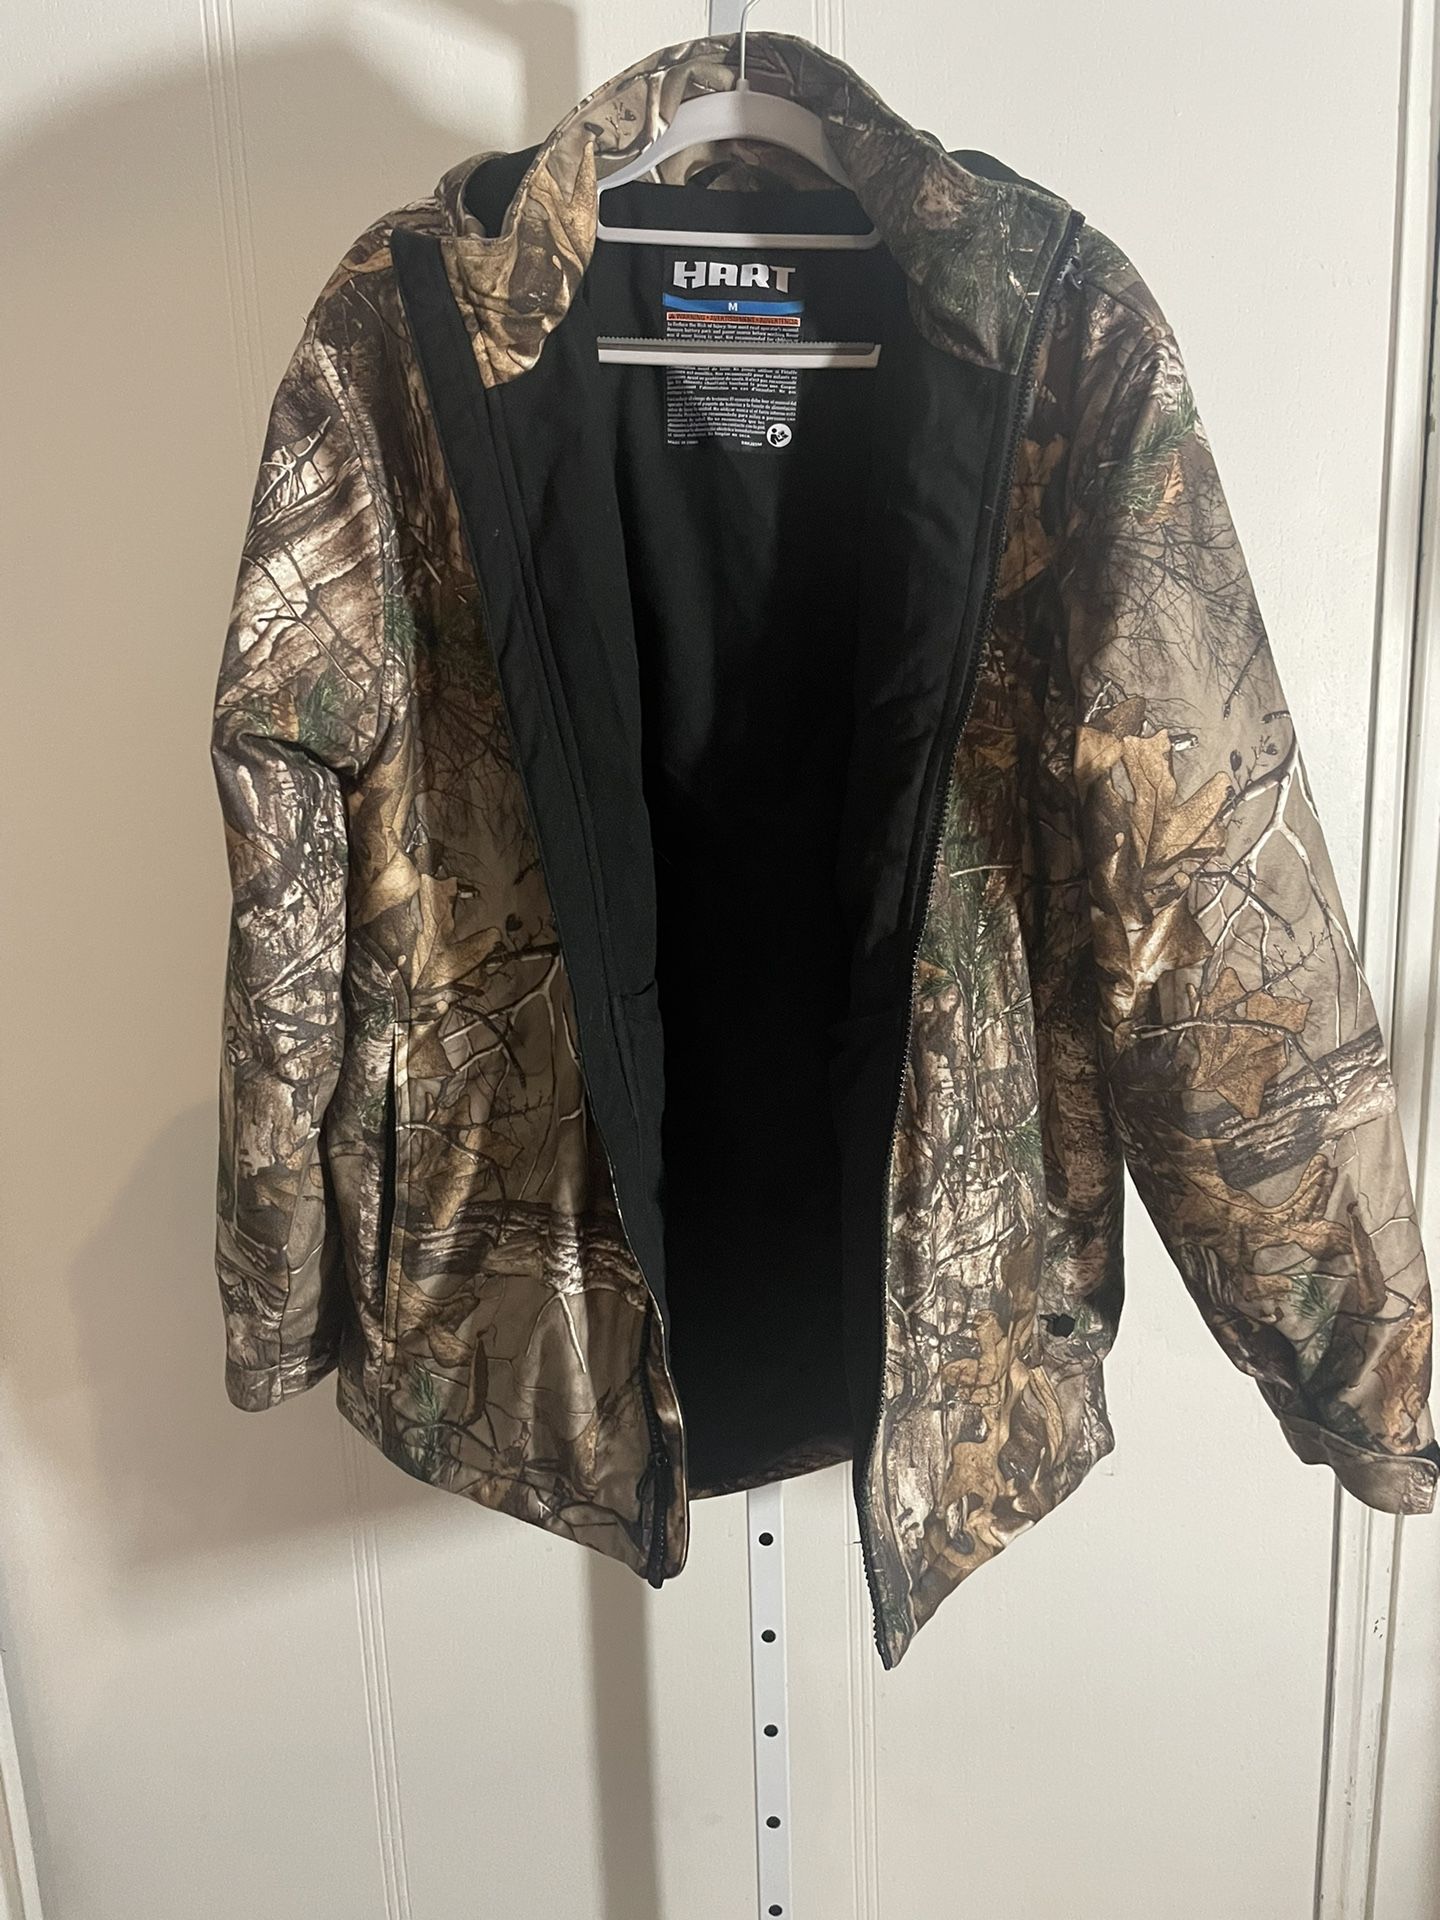 RealTree Hart Heated CoatMens Med 20V System. Coat Only. No Battery Or Charger